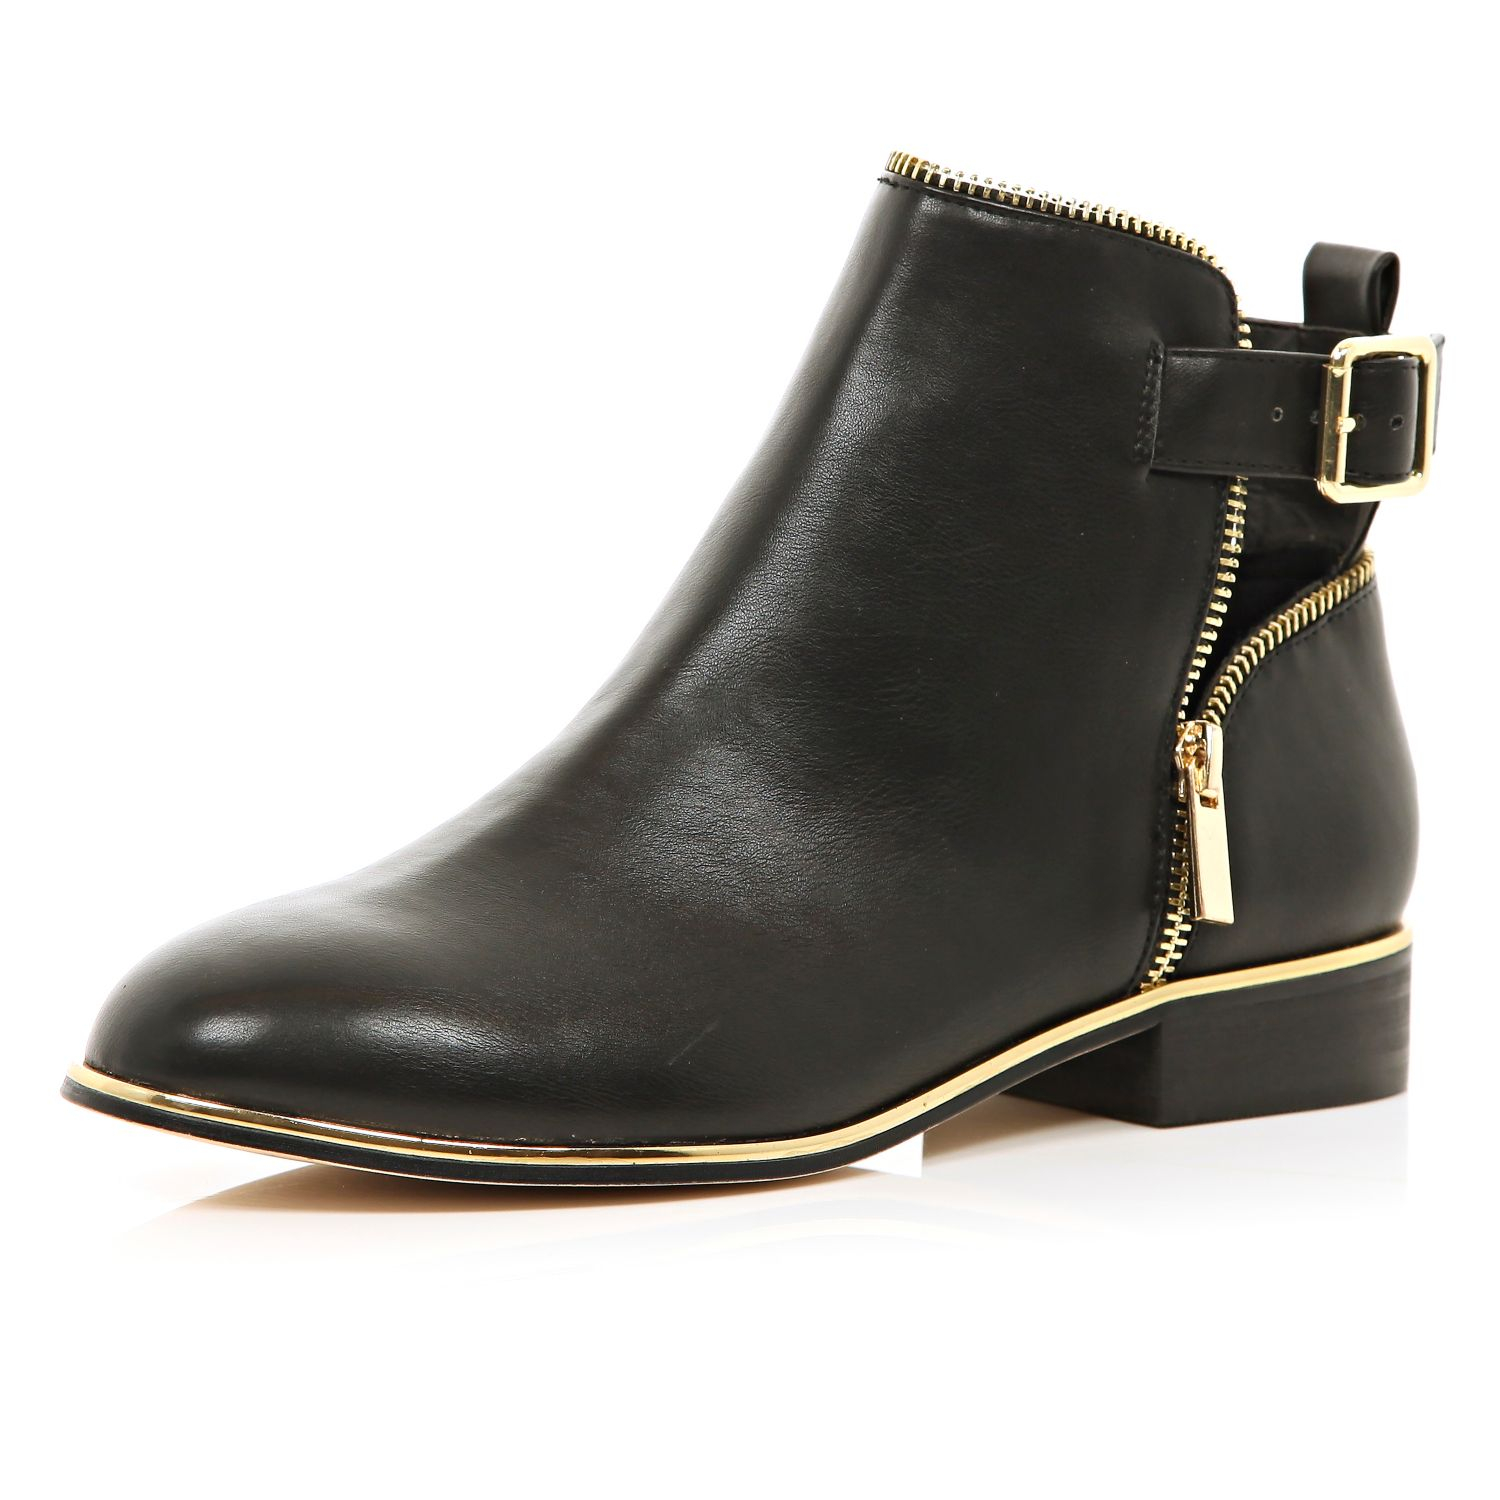 River island Black Zip Trim Ankle Boots in Black | Lyst